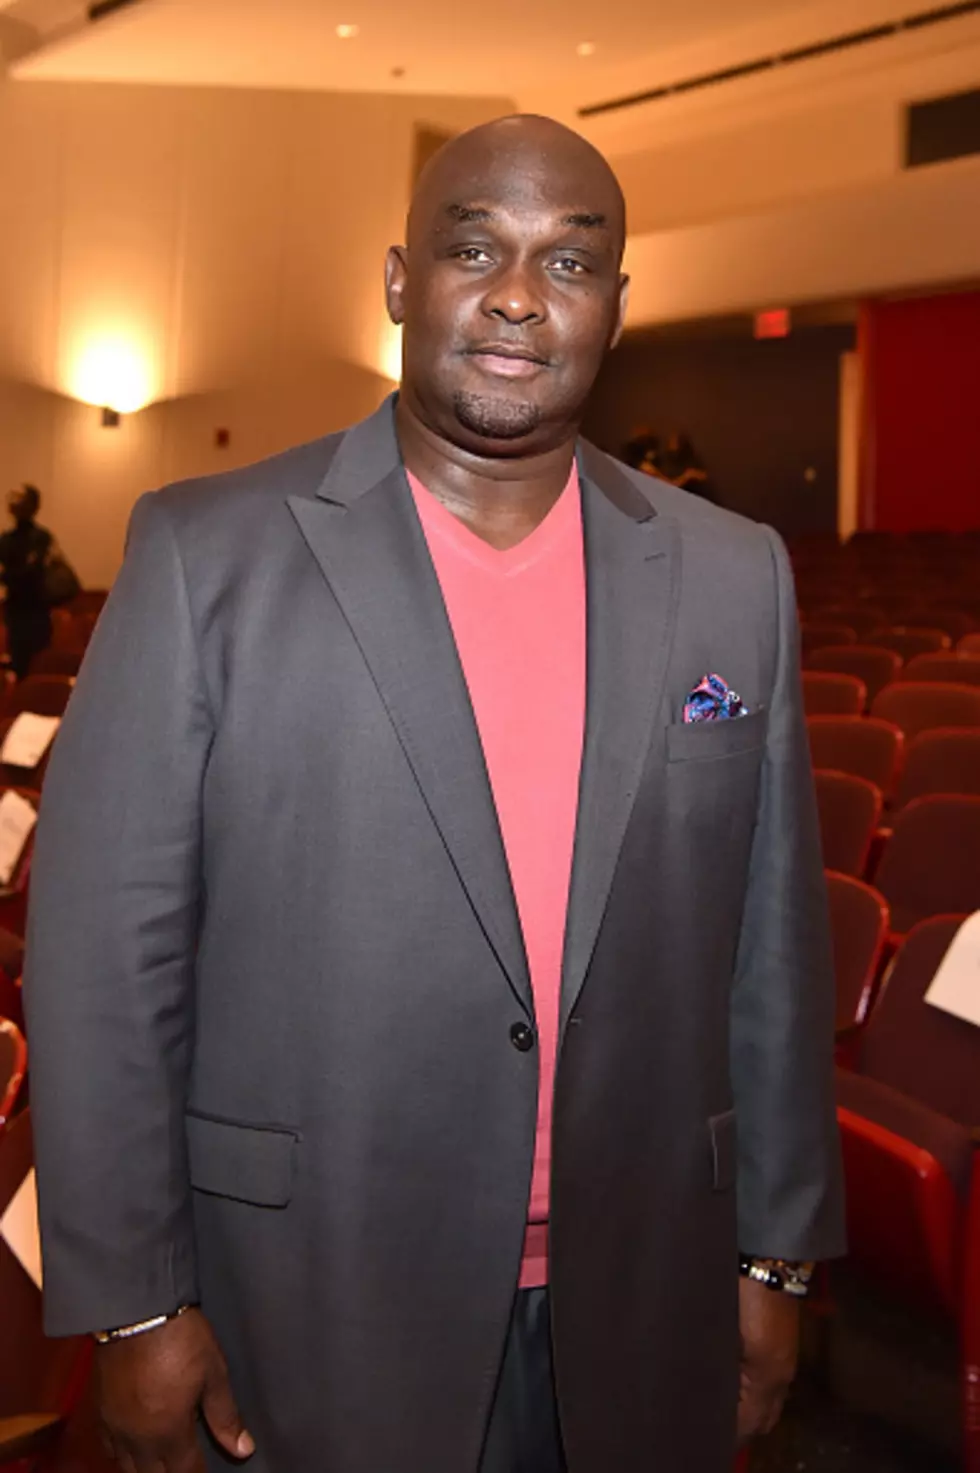 Tommy Ford From ‘Martin’ Dead at 52